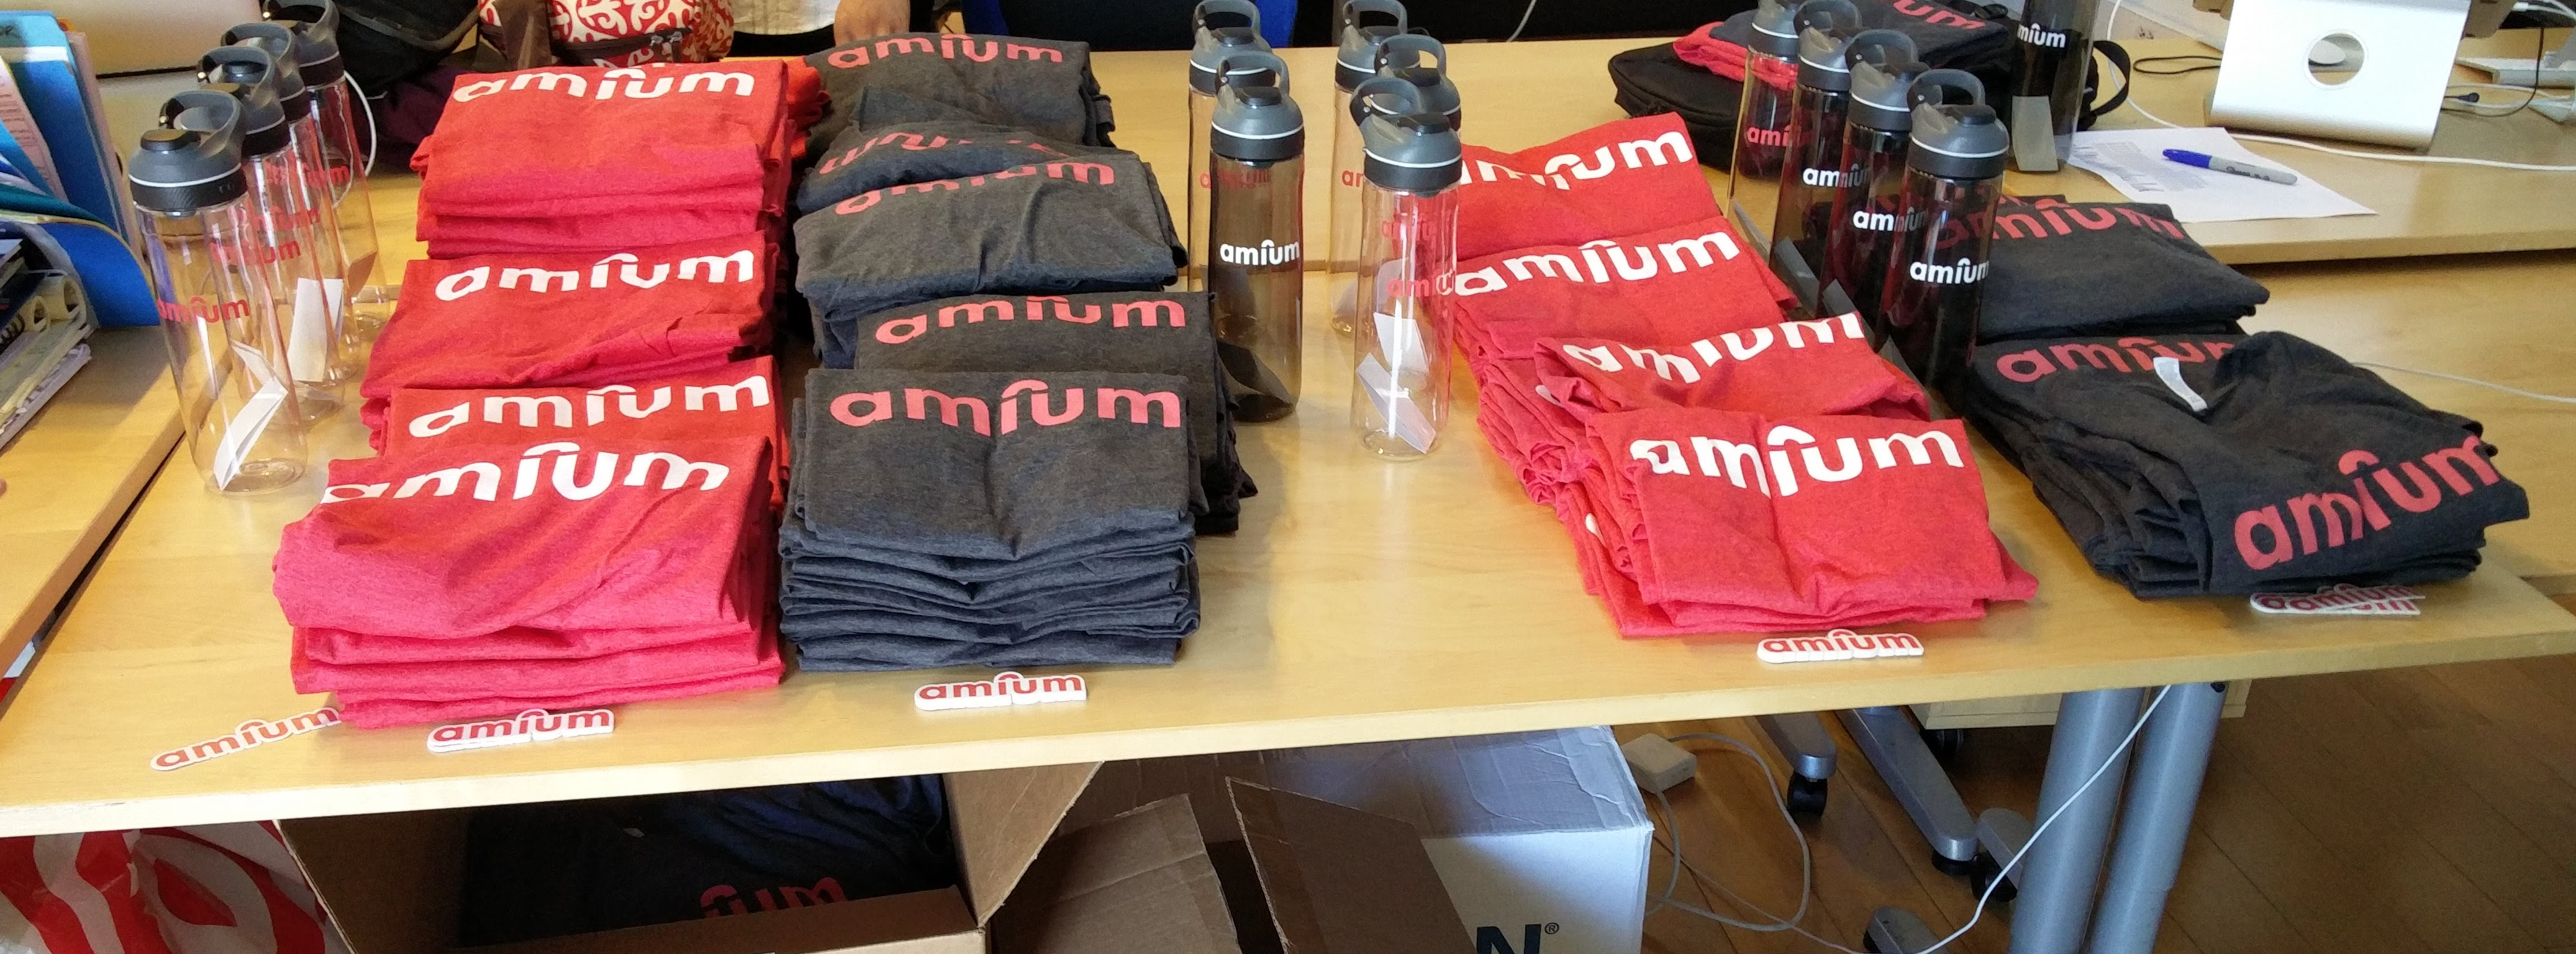 Amium swag at the Launch Party